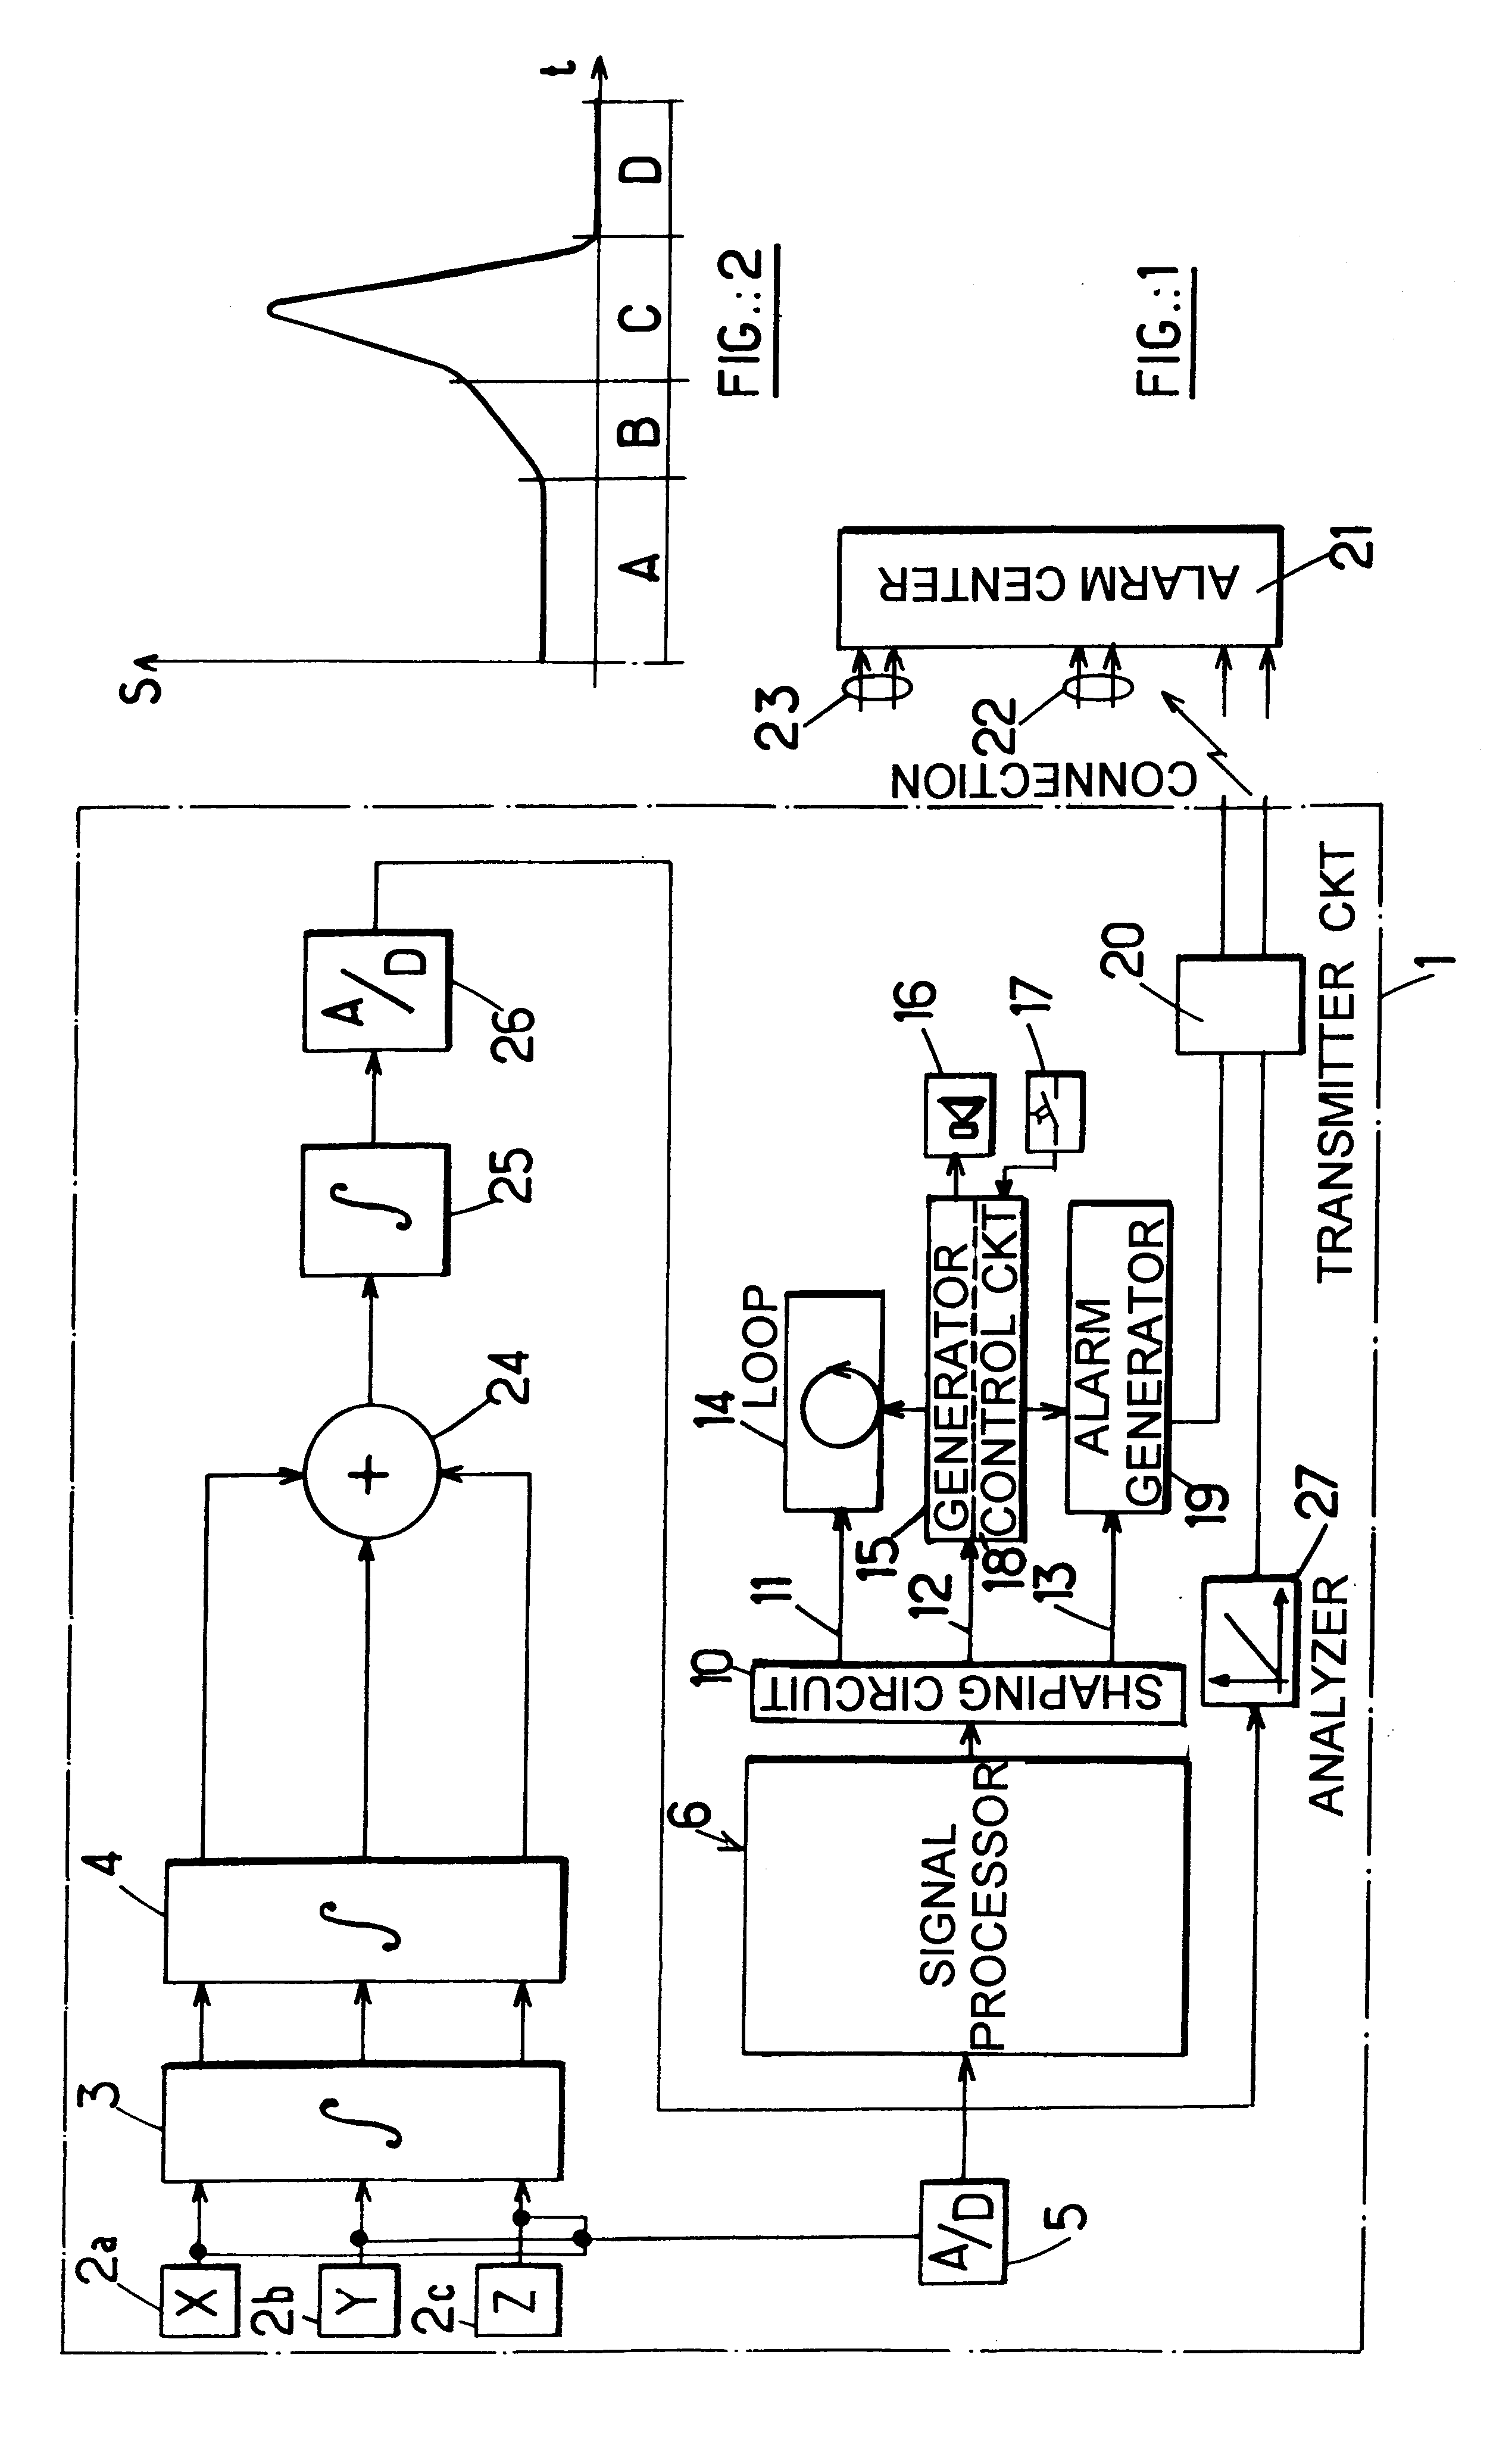 Device for monitoring the activity of a person and/or detecting a fall, in particular with a view to providing help in the event of an incident hazardous to life or limb